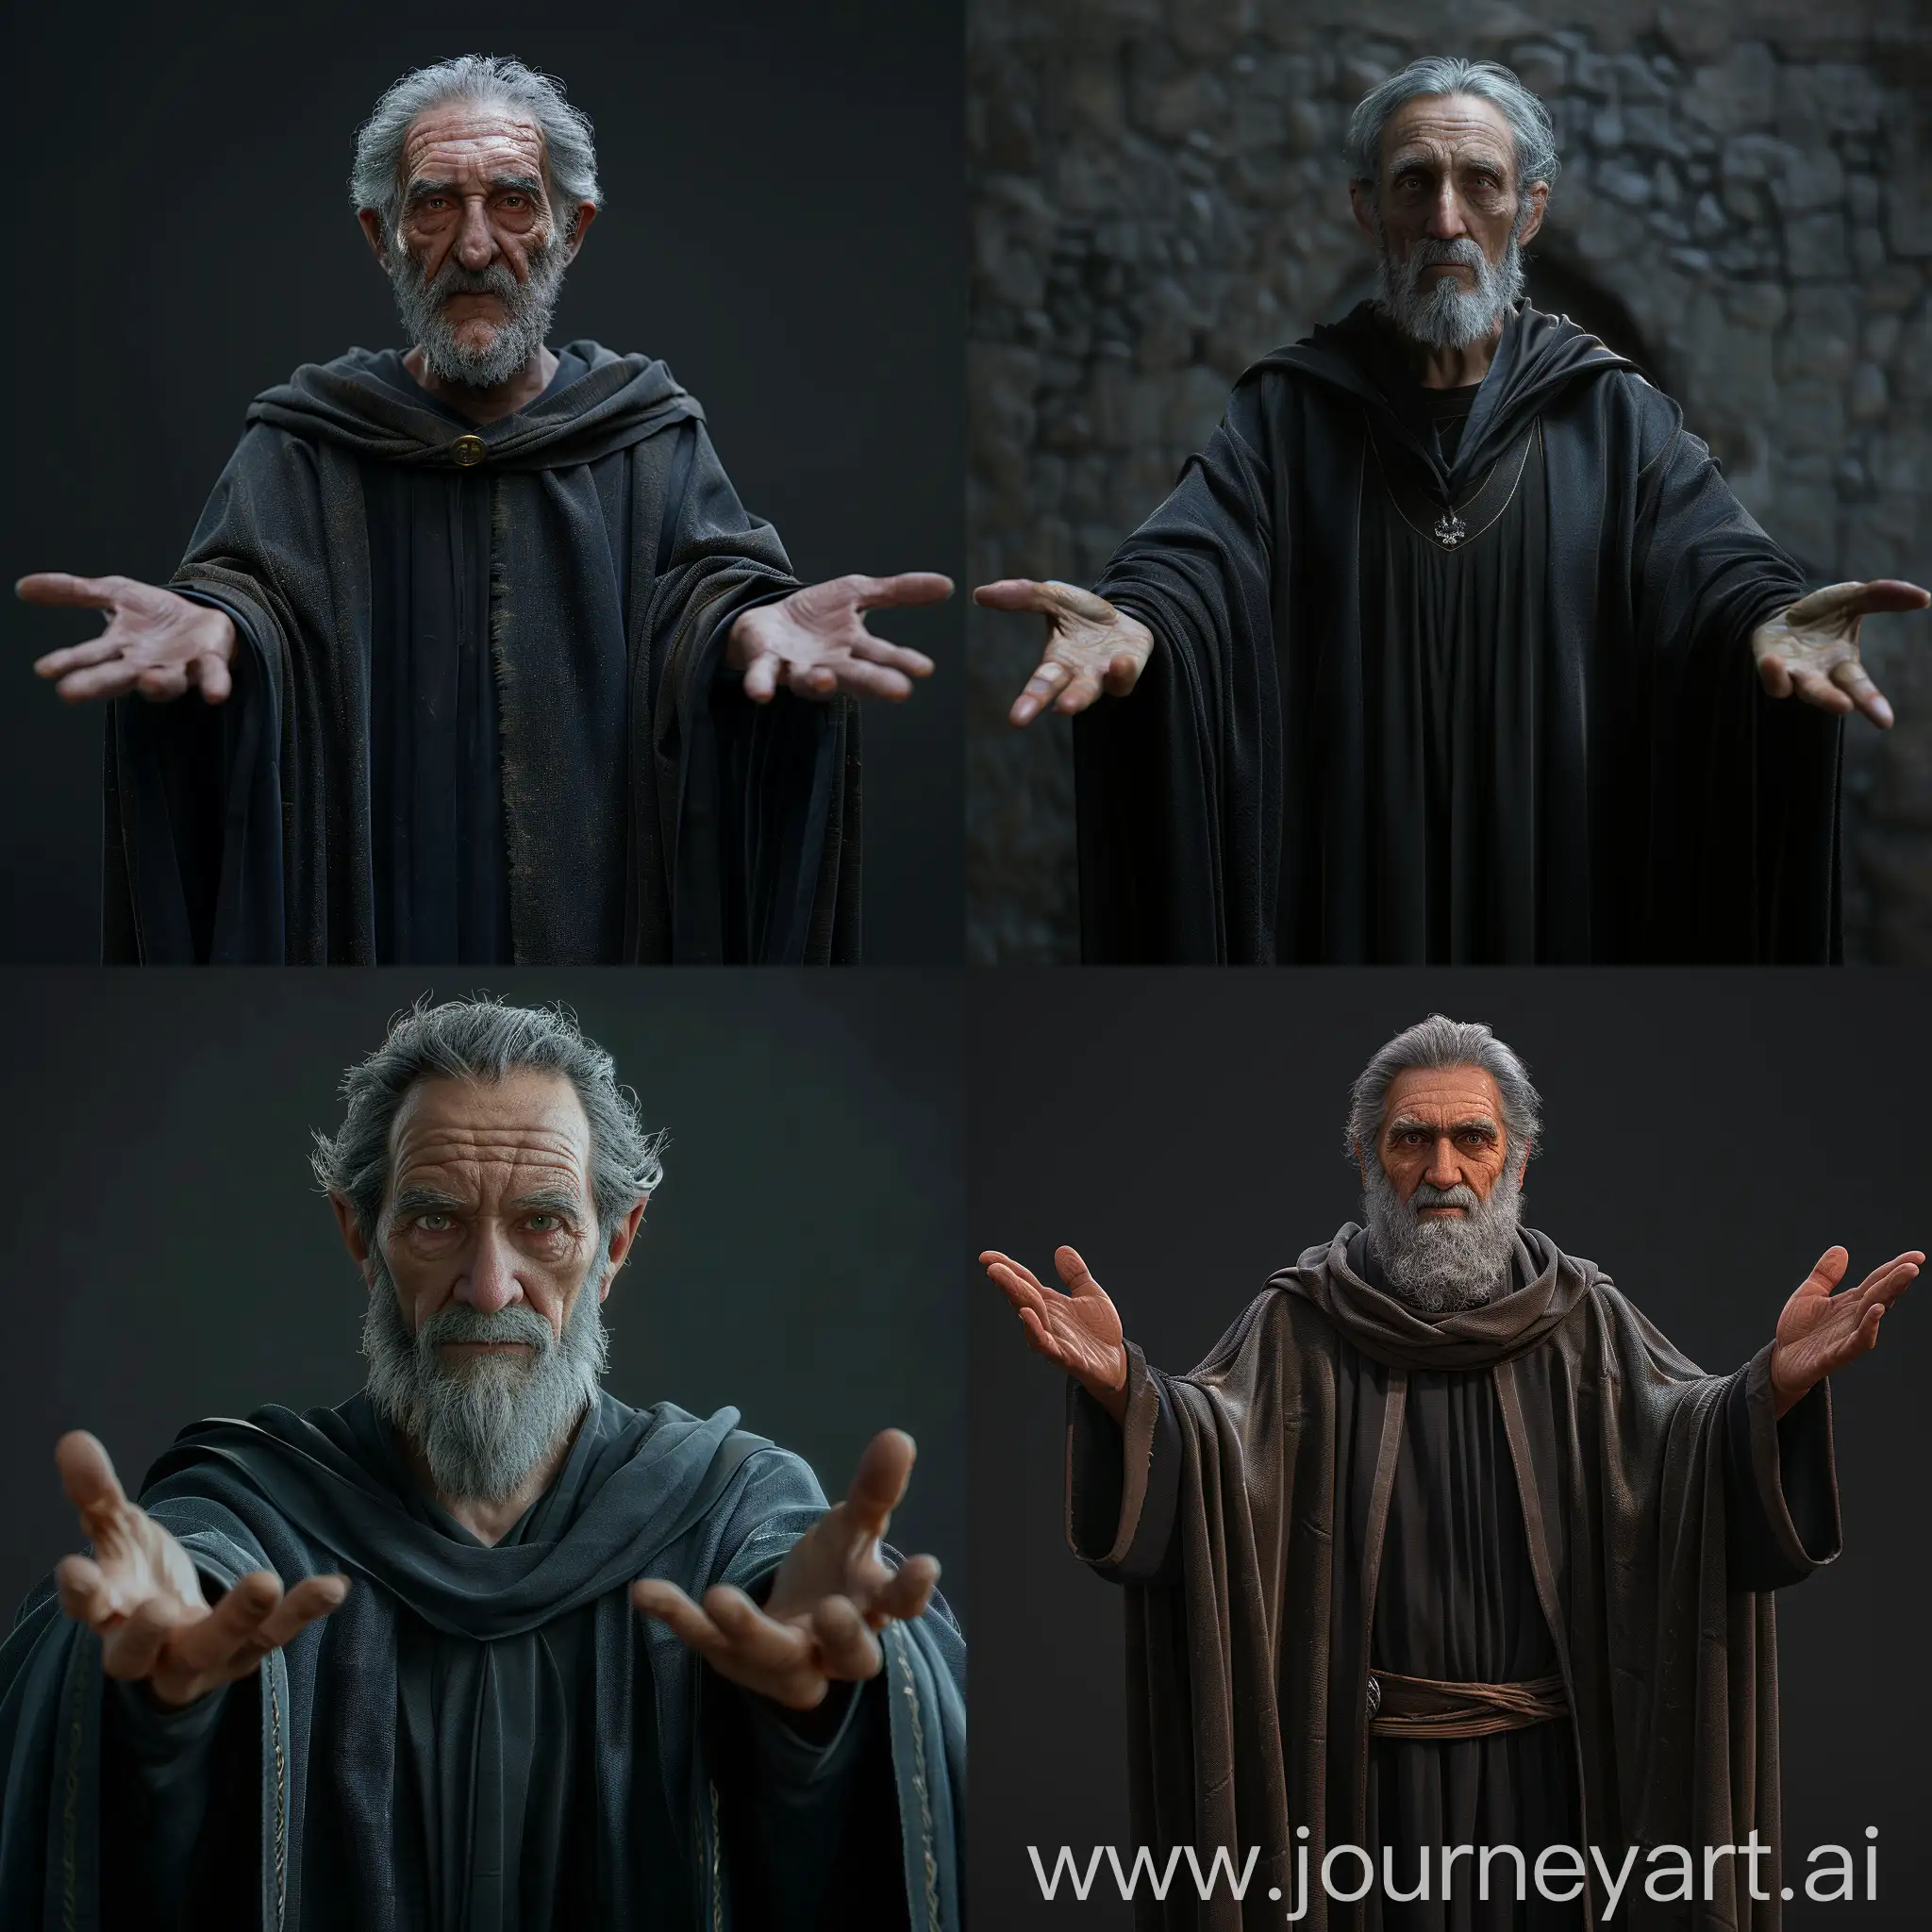 Mystical-Grandfather-Sorcerer-Welcoming-Presence-in-Surreal-Darkness